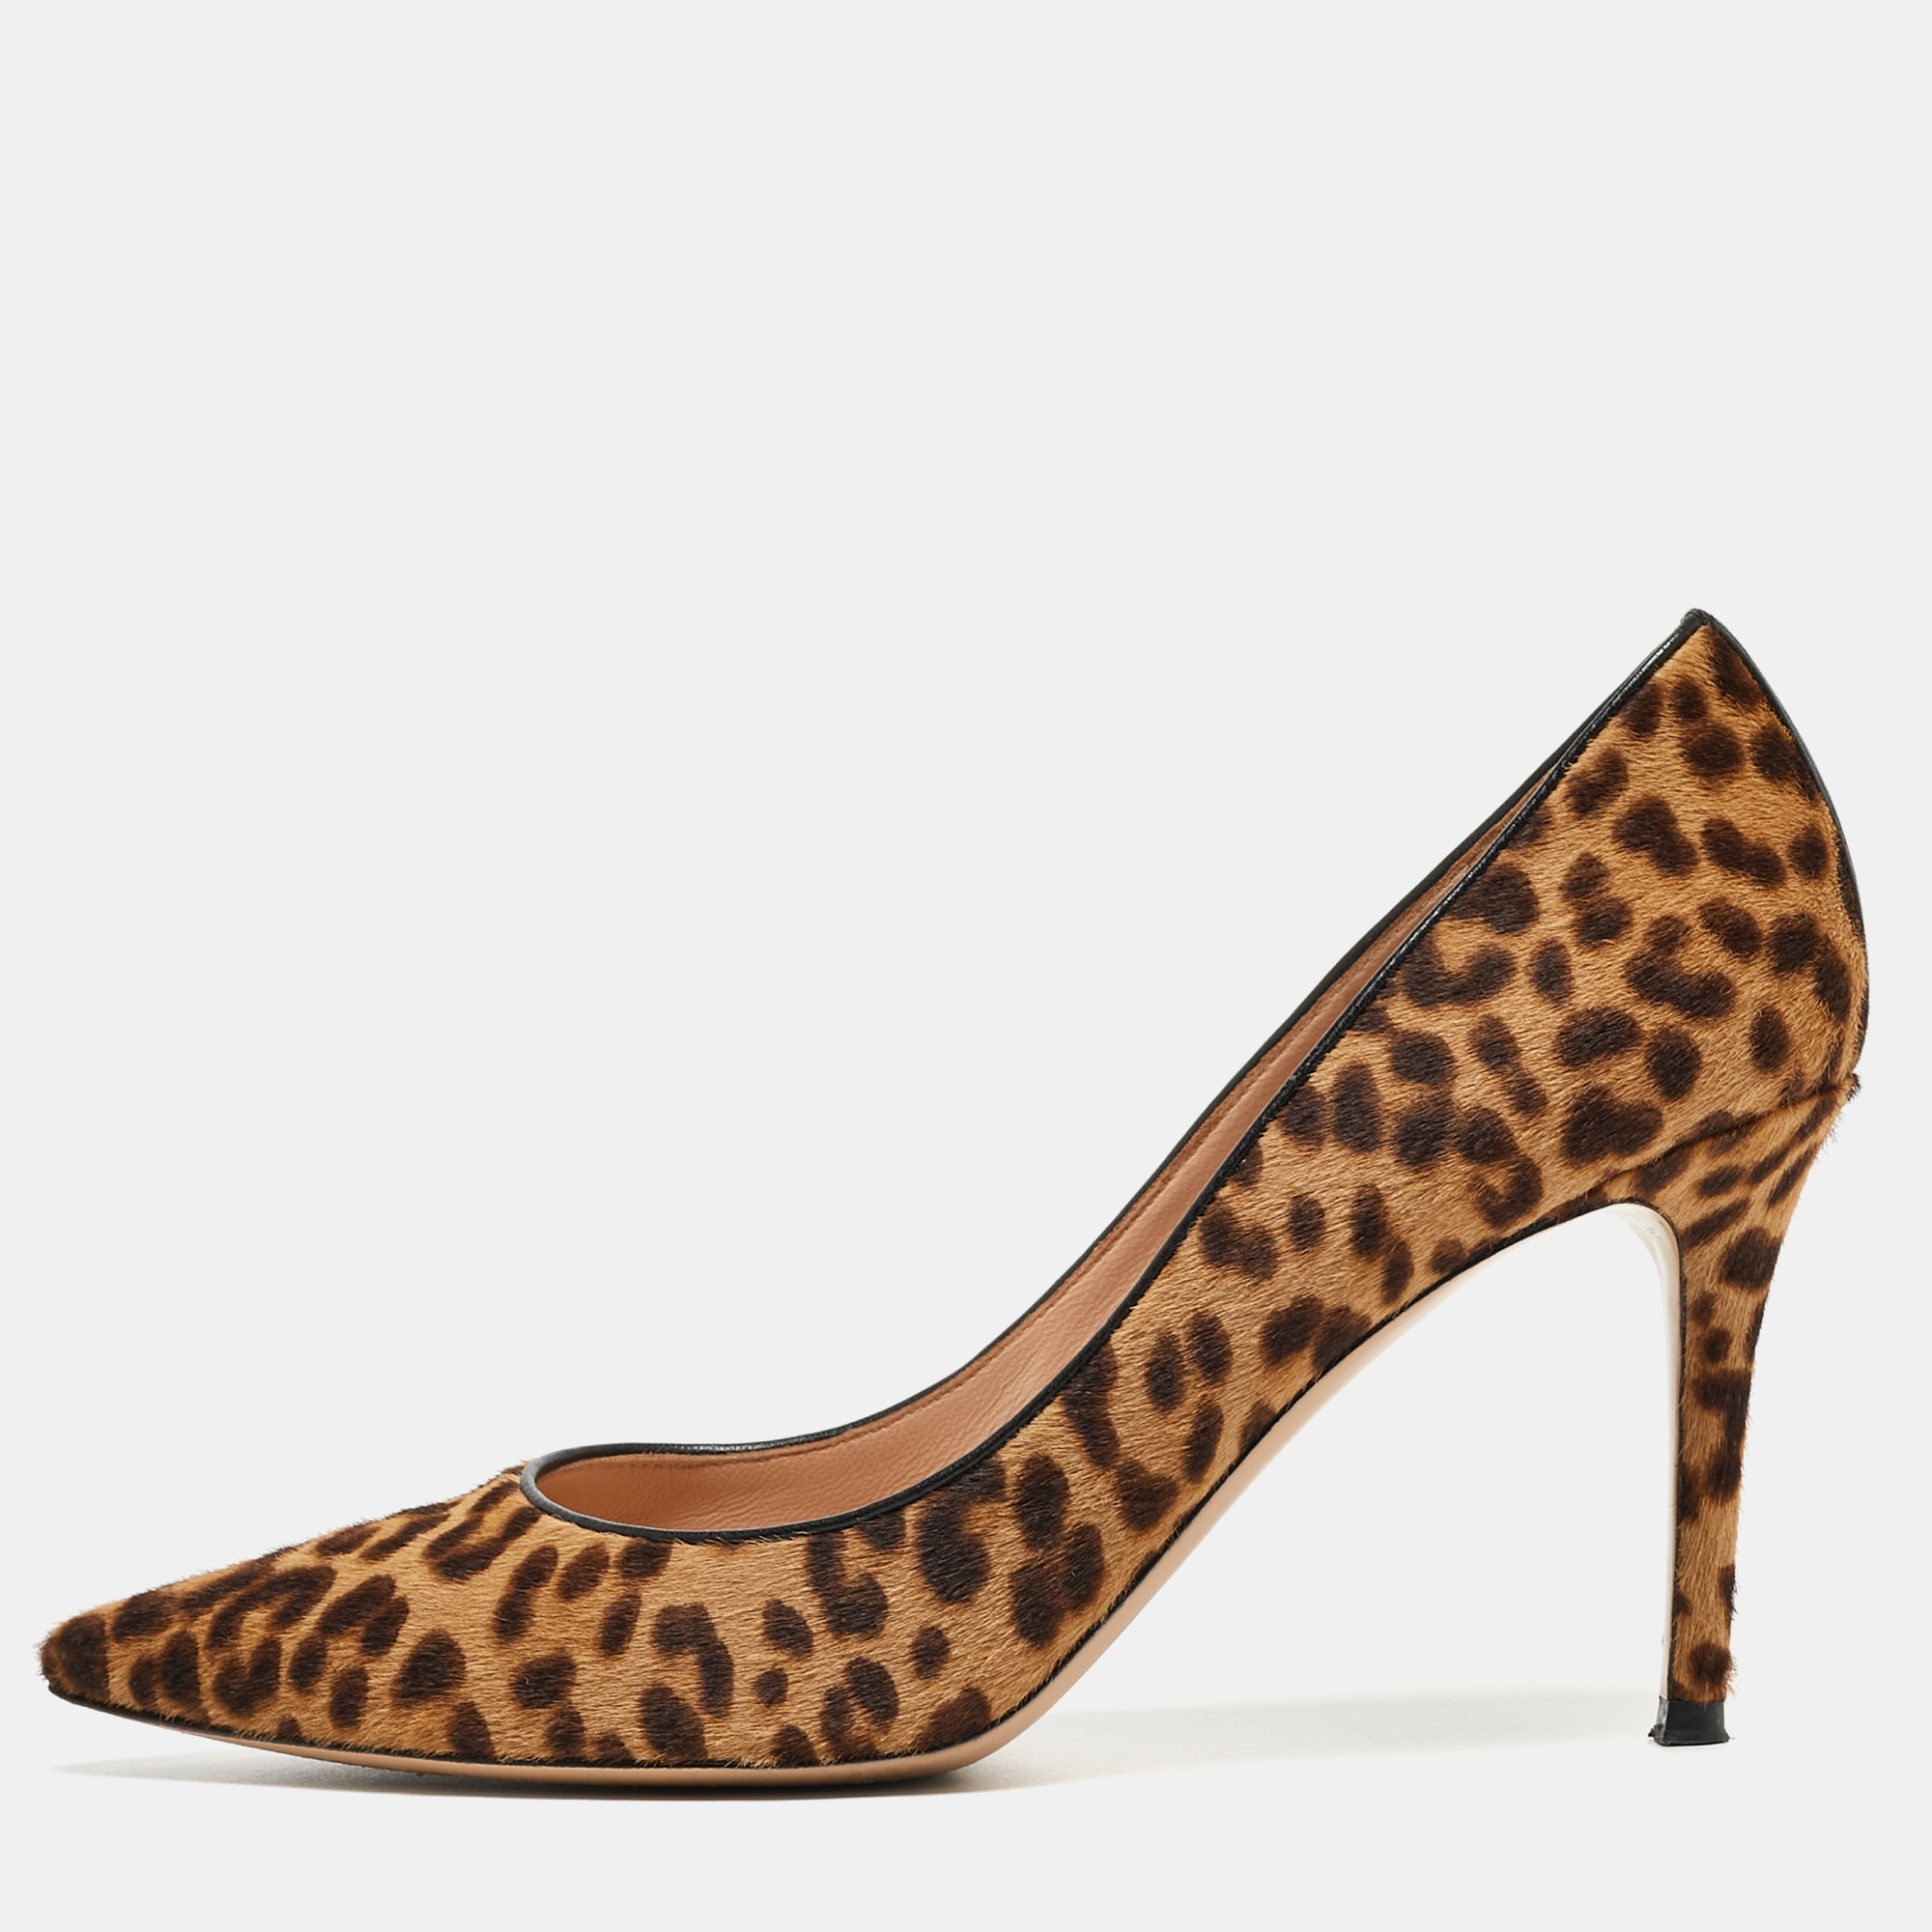 Pre-owned Gianvito Rossi Brown/beige Leopard Print Calf Hair Pointed Toe Pumps Size 40